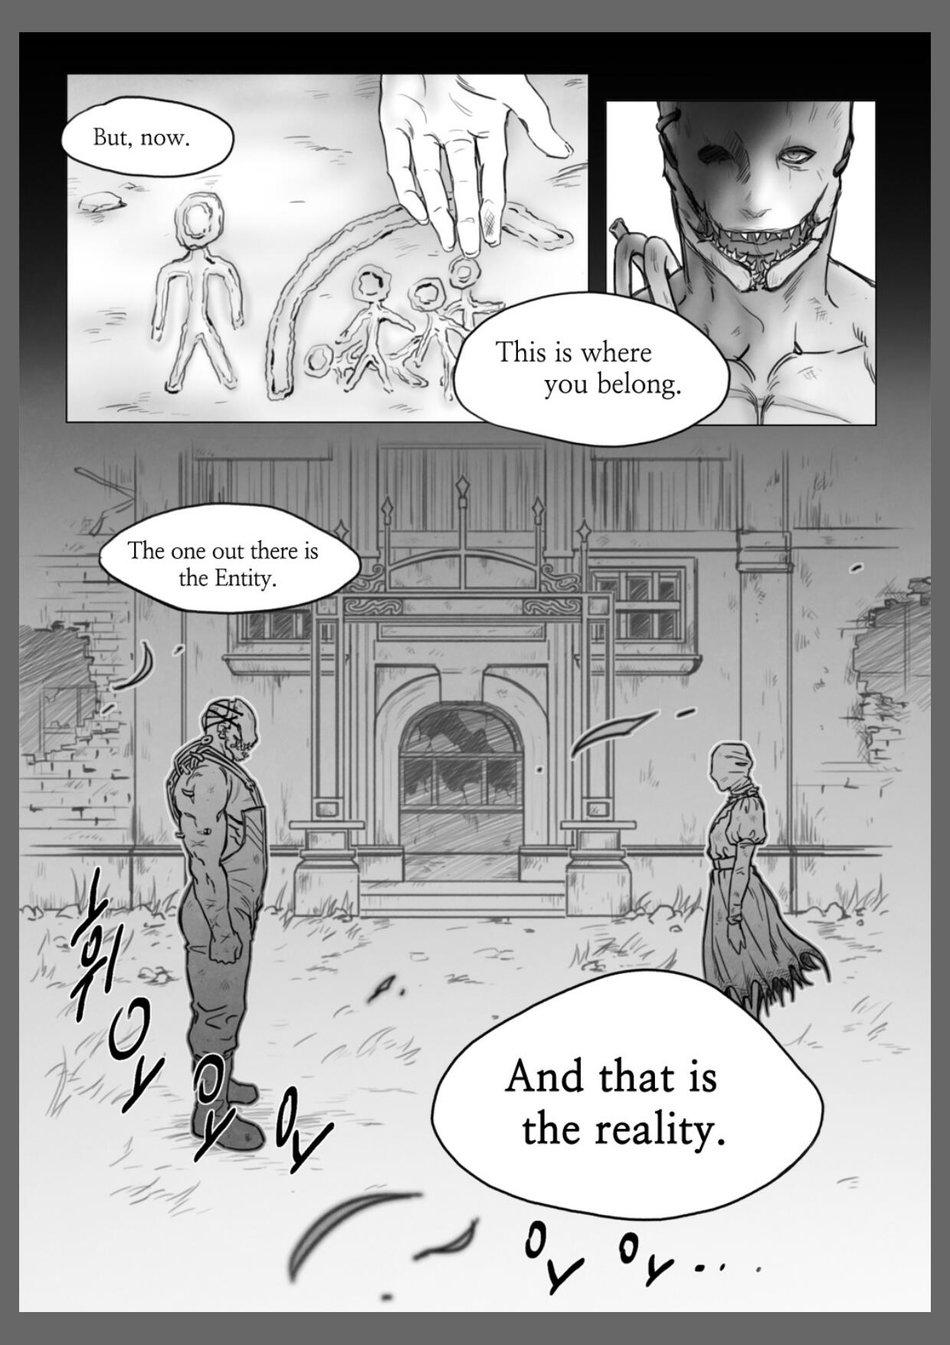 Nasty Bring Me to Death - Dead by daylight Amature Allure - Page 7